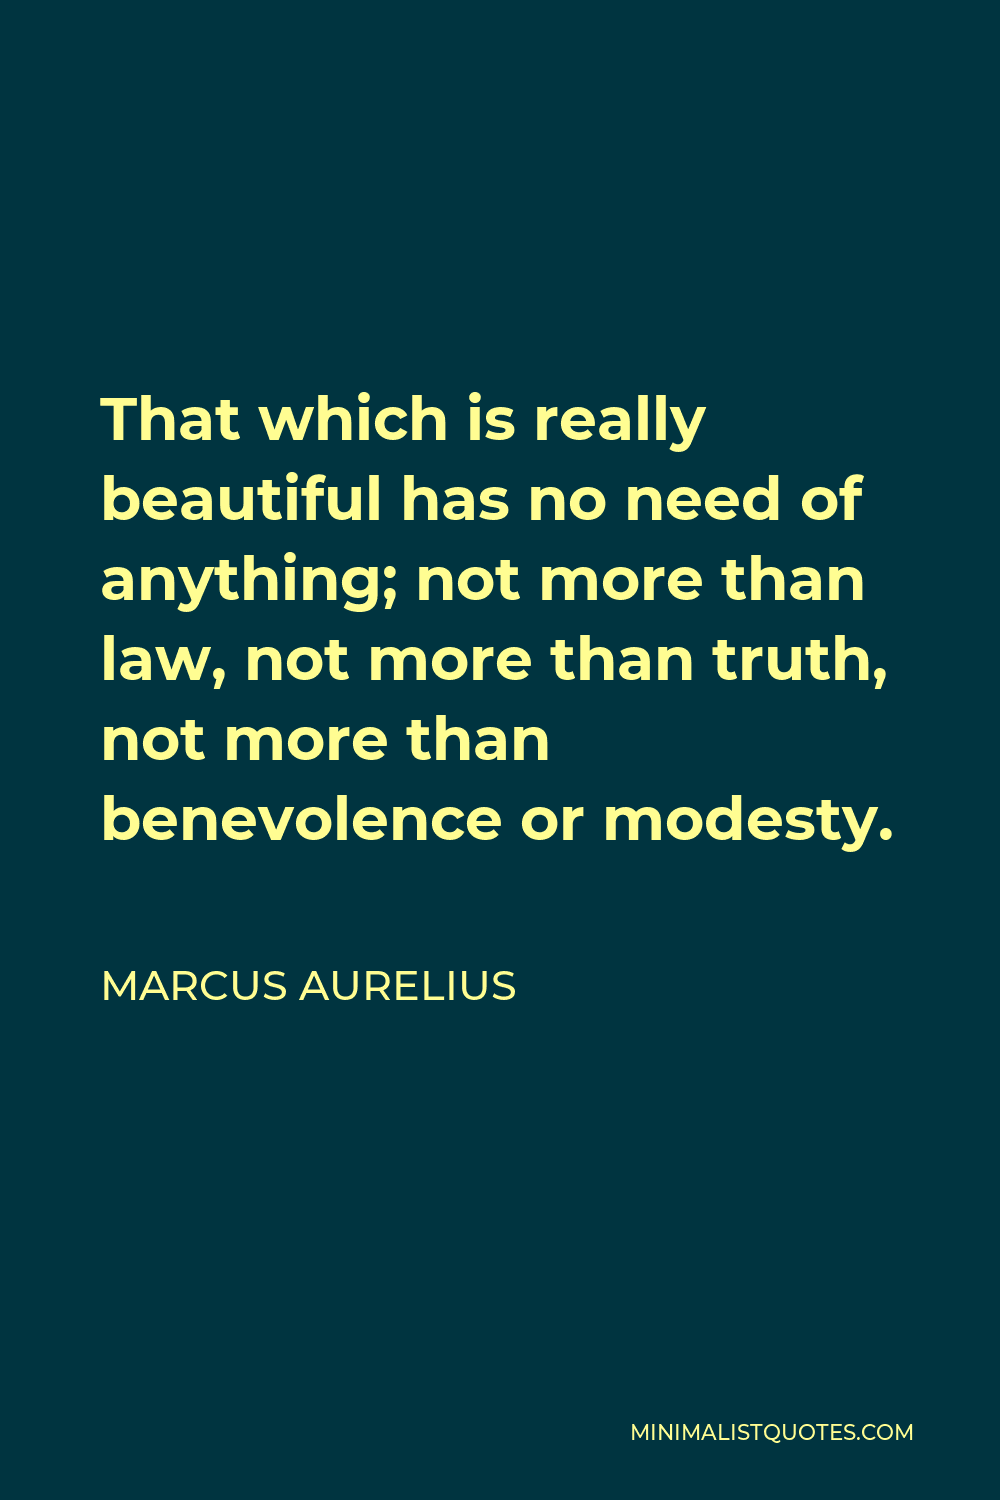 Marcus Aurelius Quote - That which is really beautiful has no need of anything; not more than law, not more than truth, not more than benevolence or modesty.